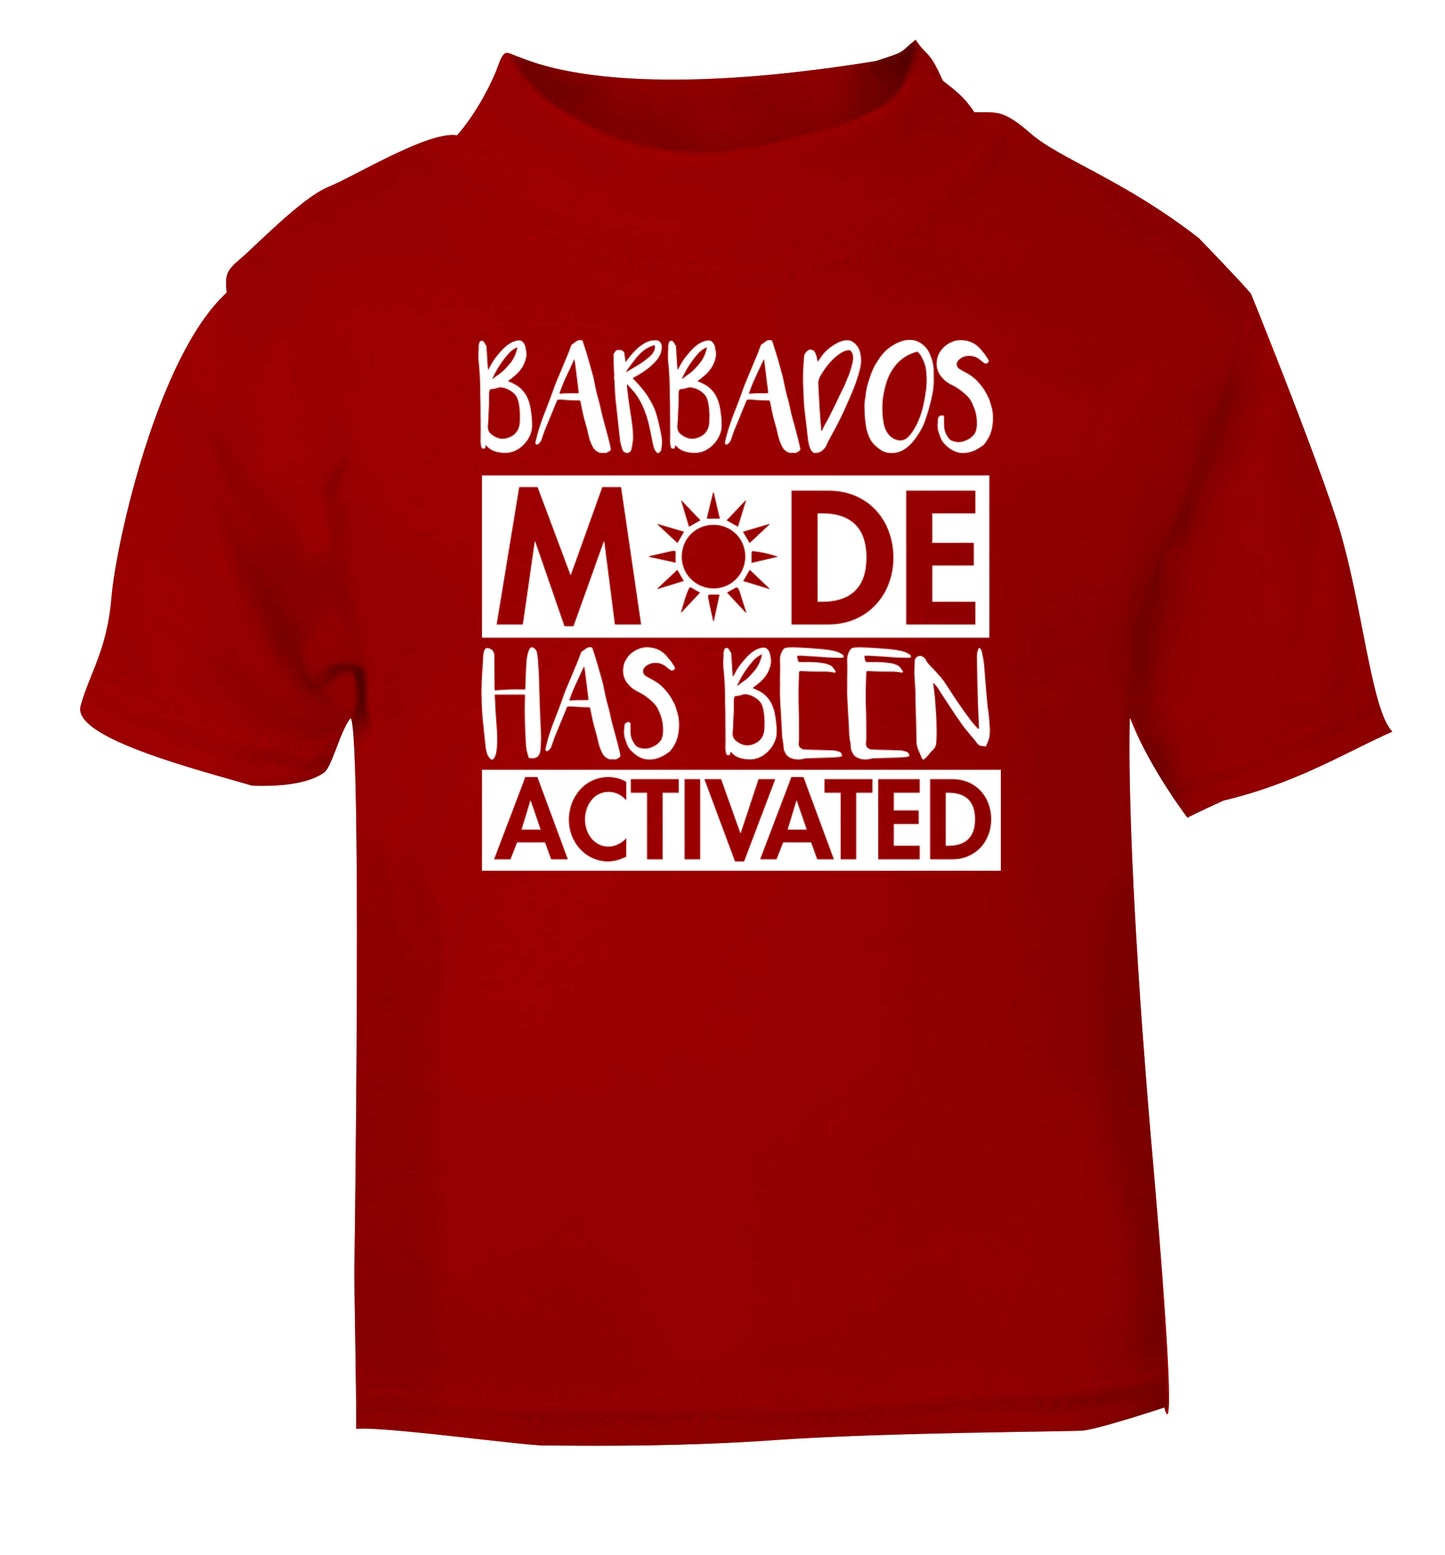 Barbados mode has been activated red Baby Toddler Tshirt 2 Years